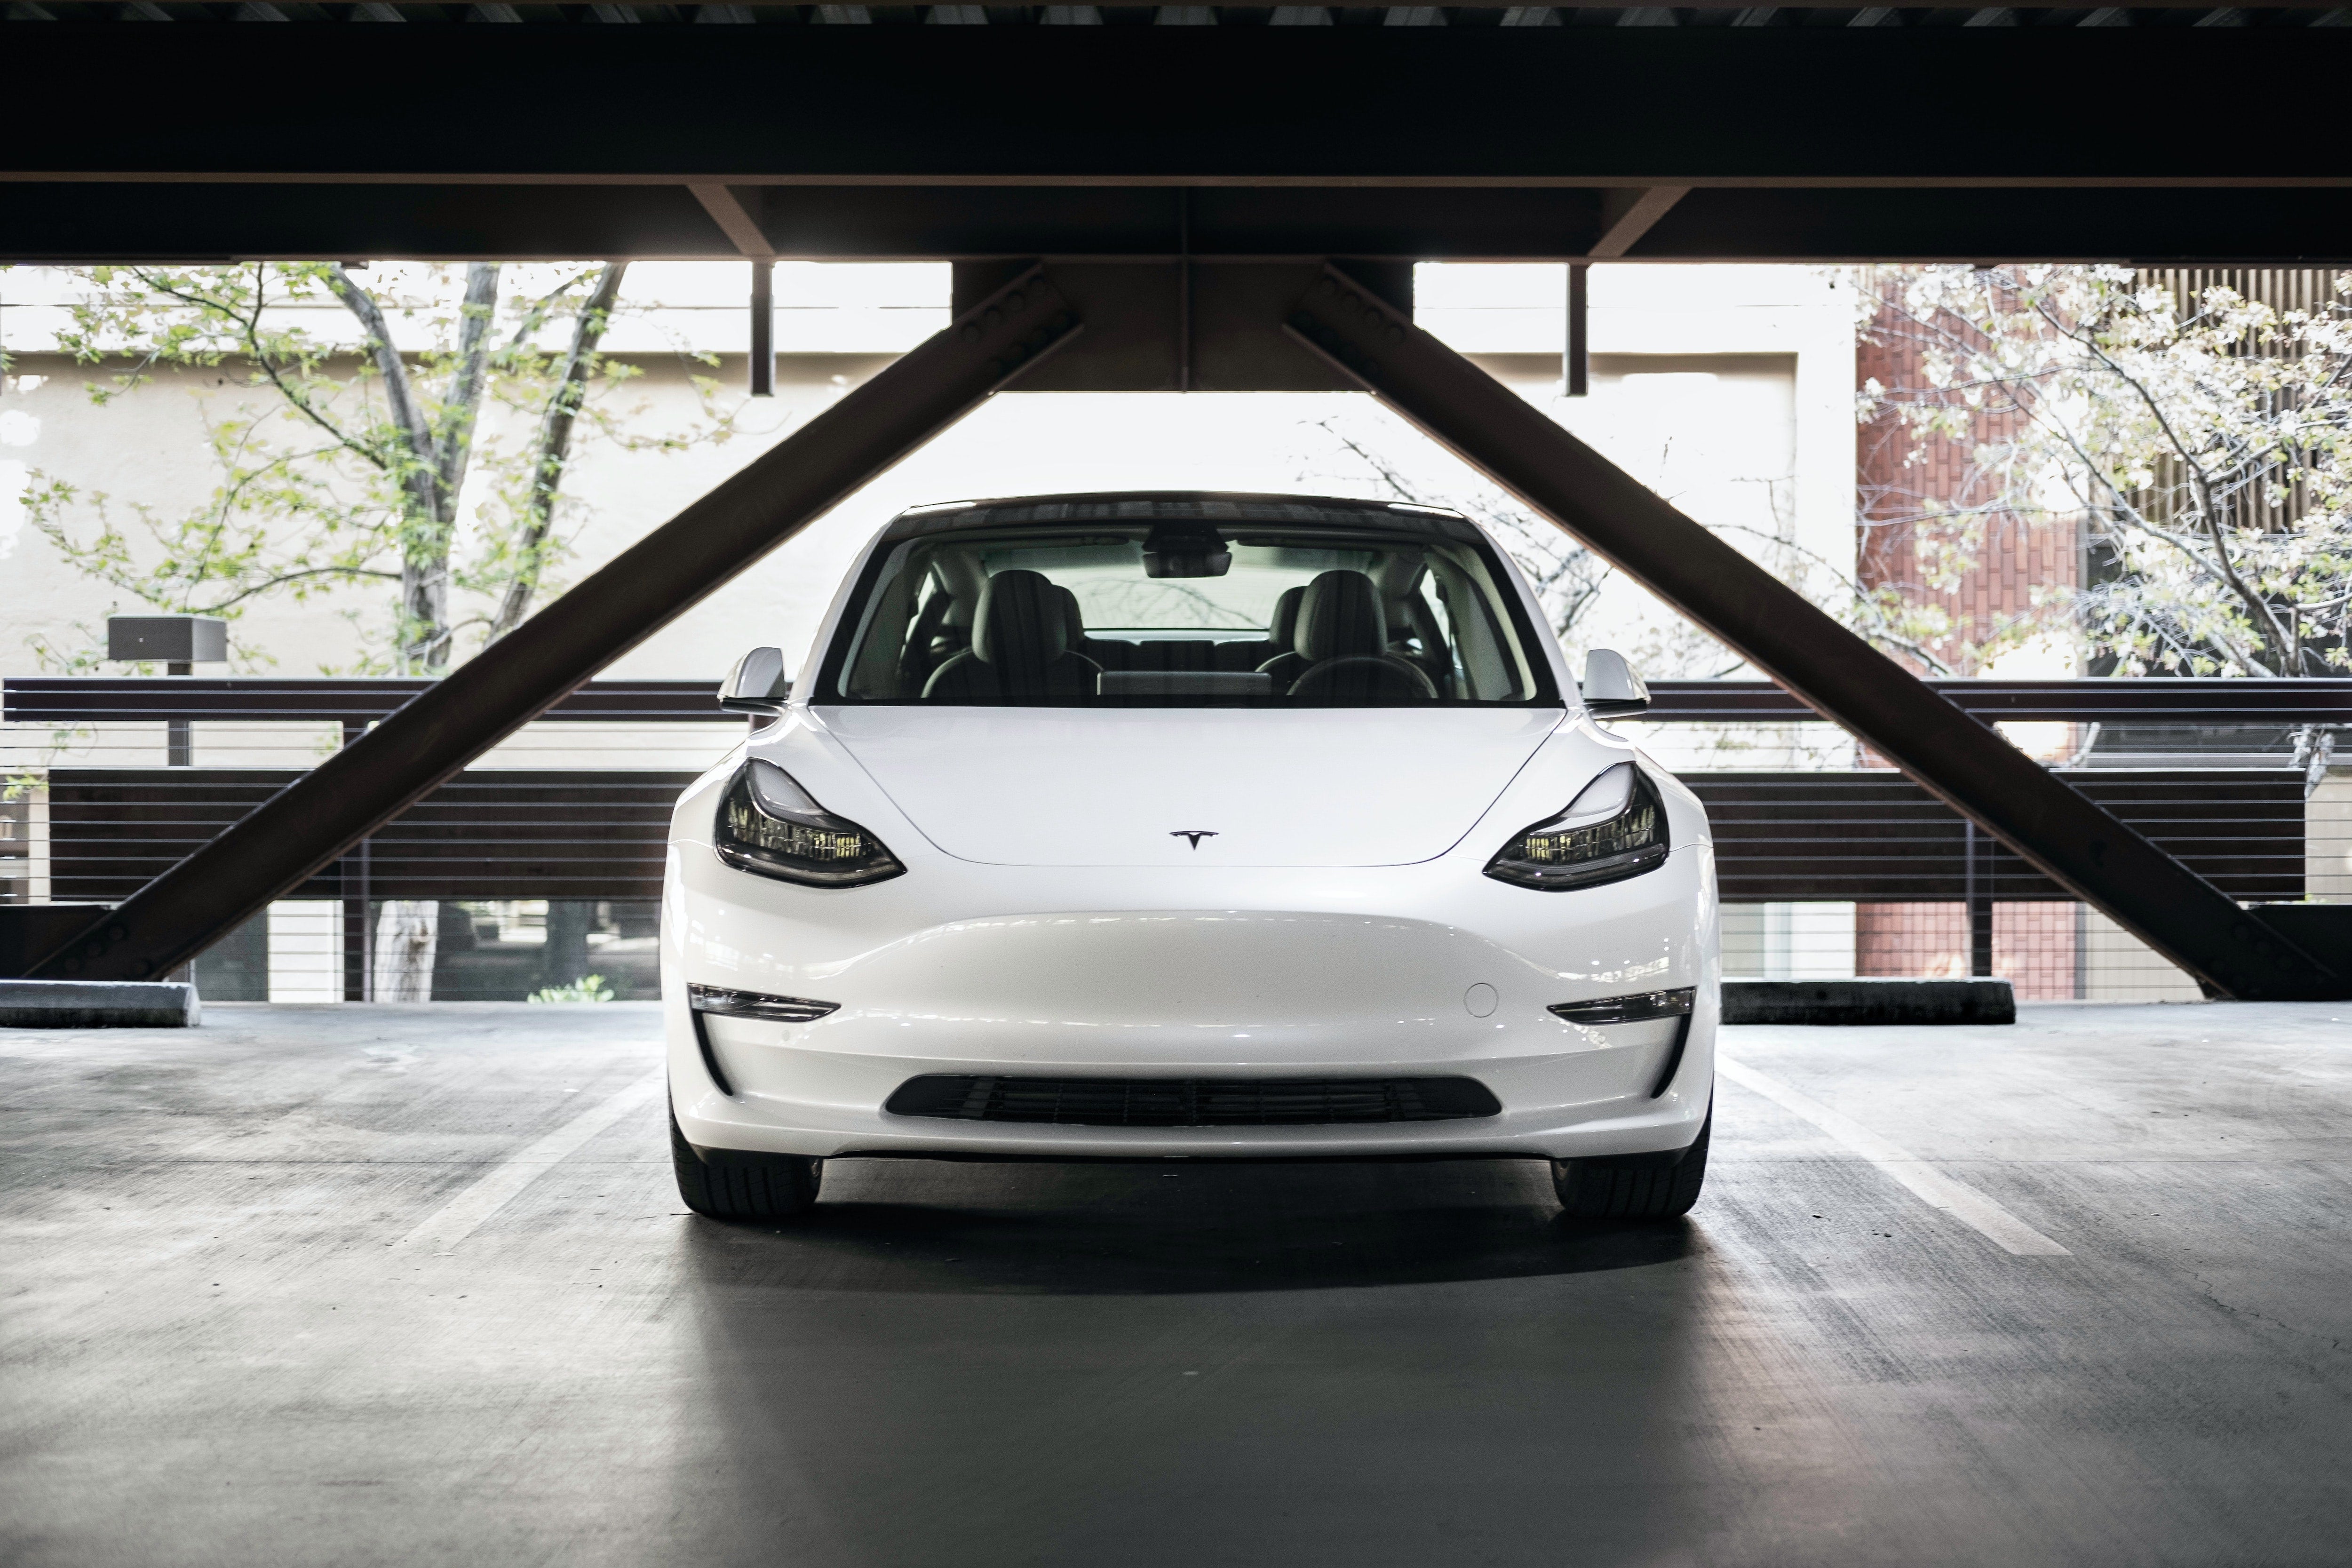 June was Tesla’s best production month yet and more